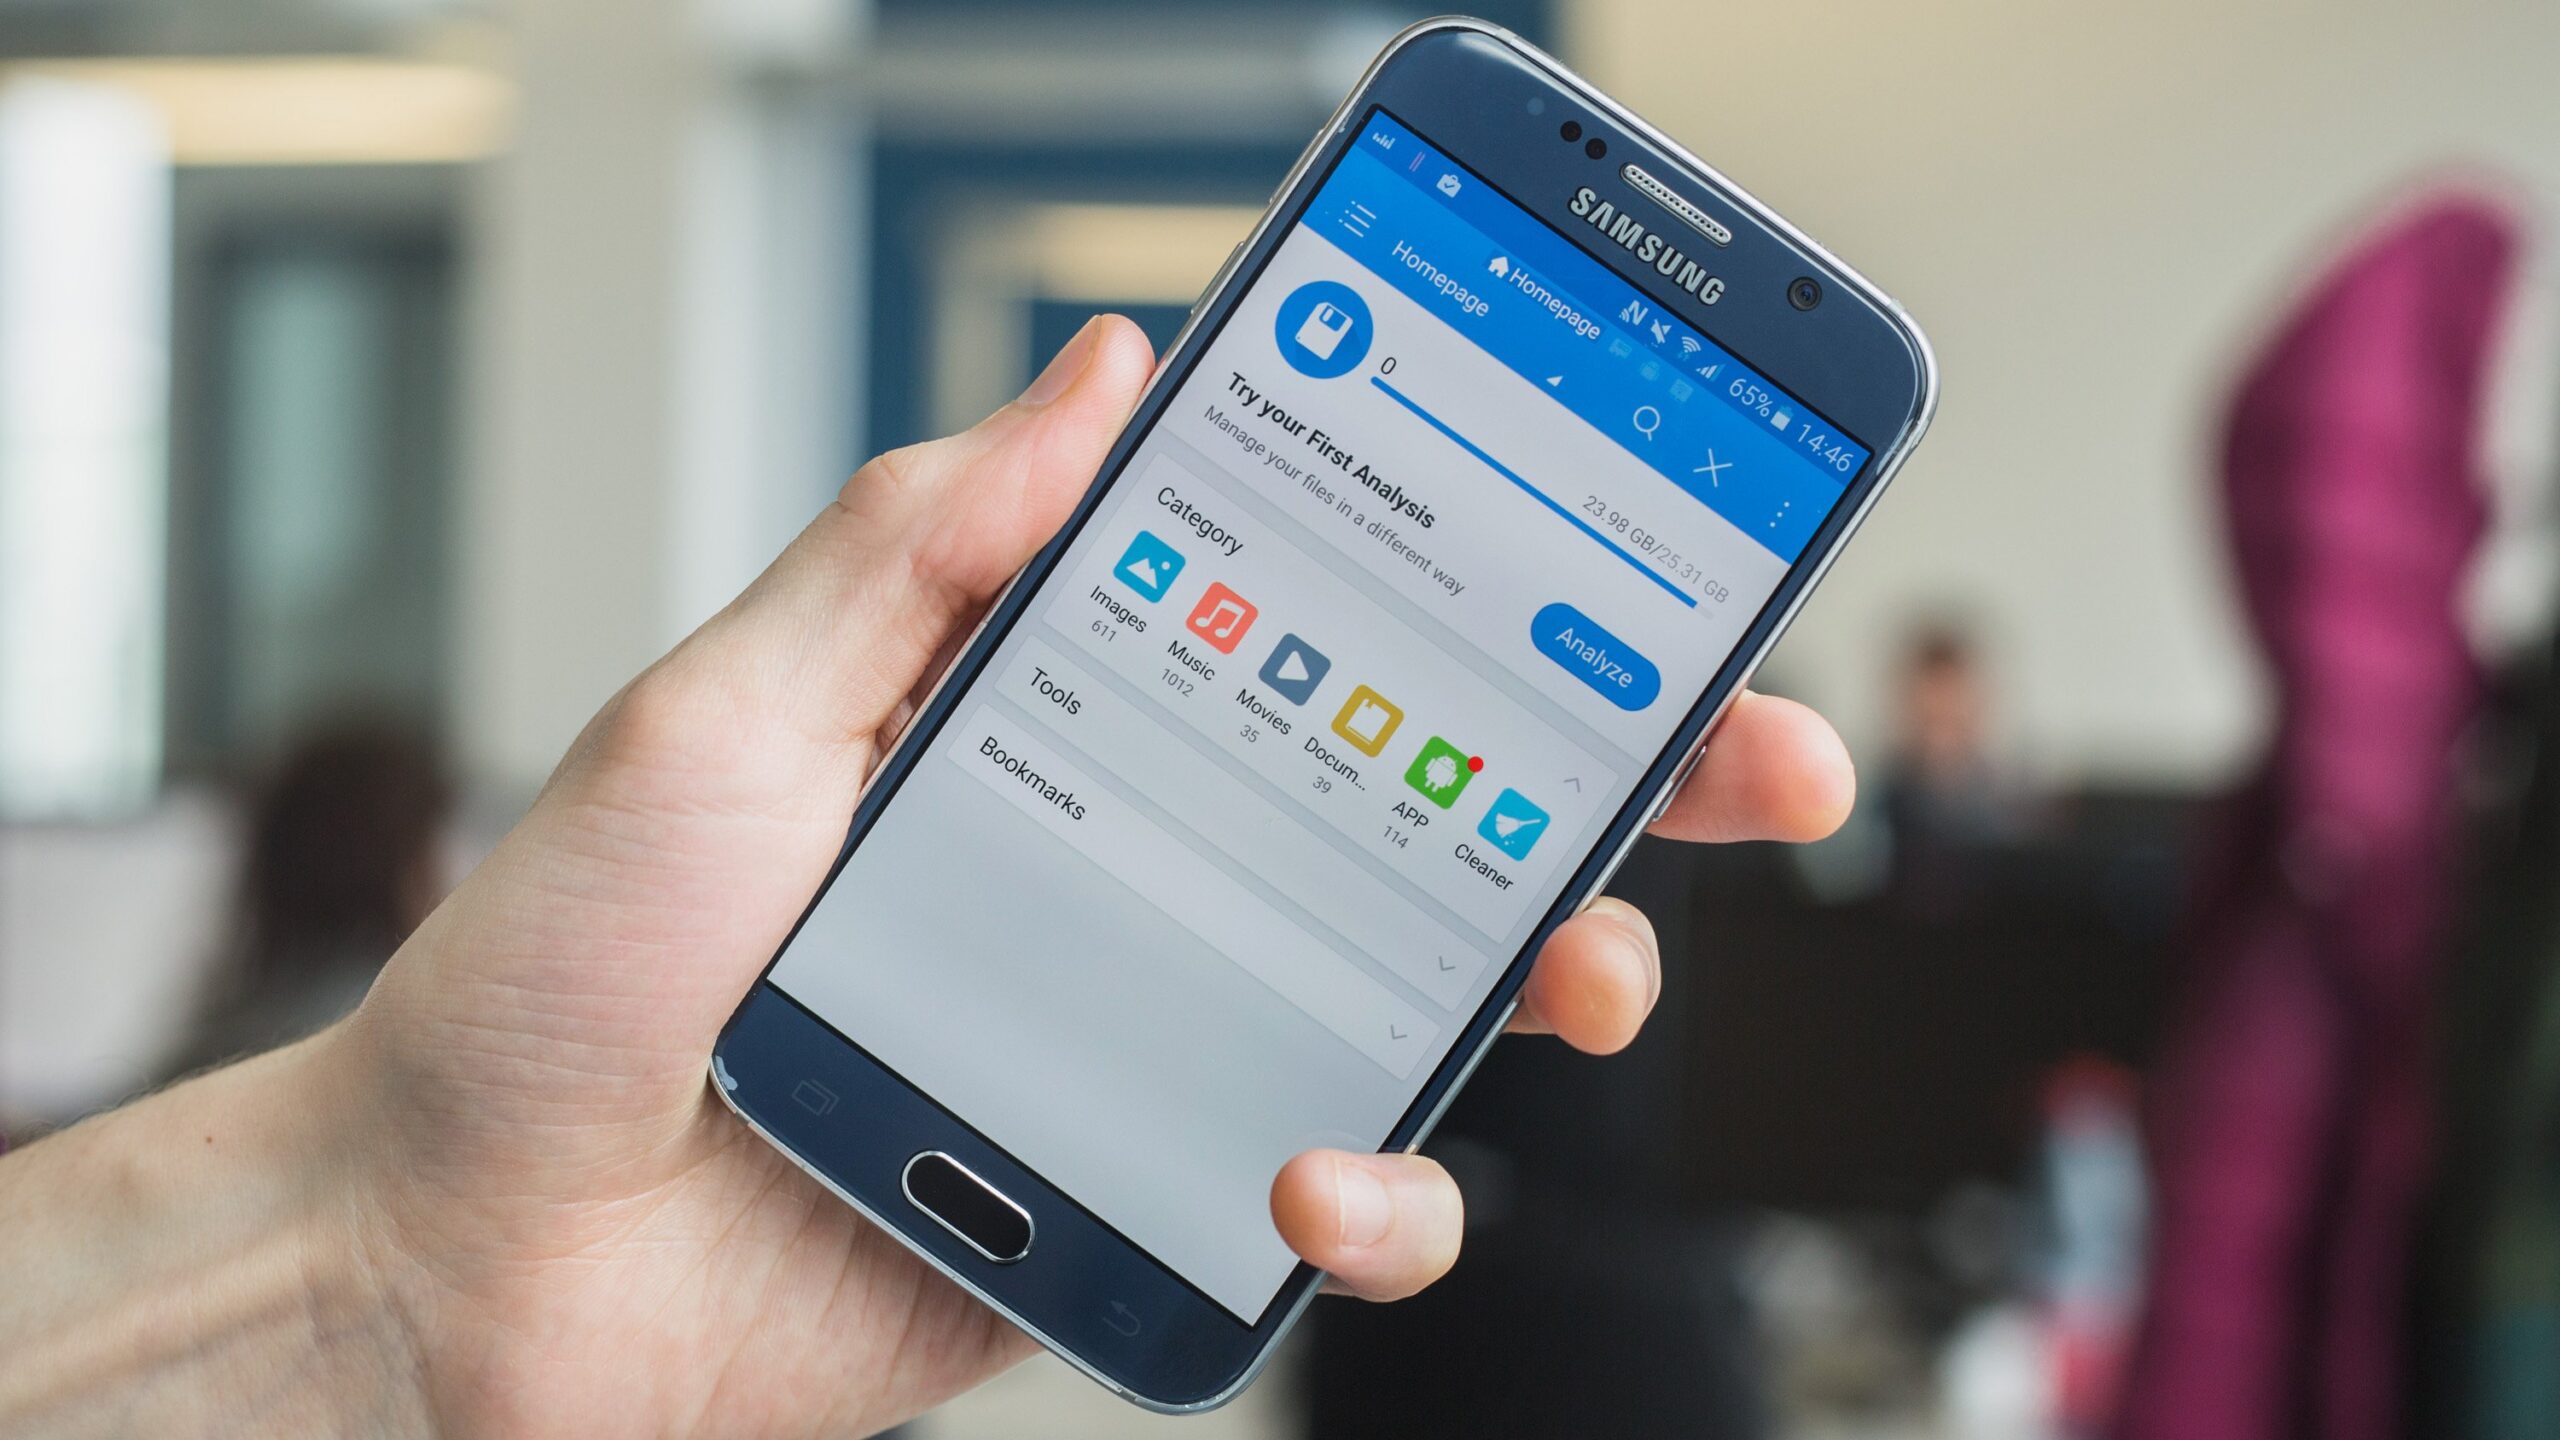 ES File Manager out of Play Store? Meet the best file managers for Android